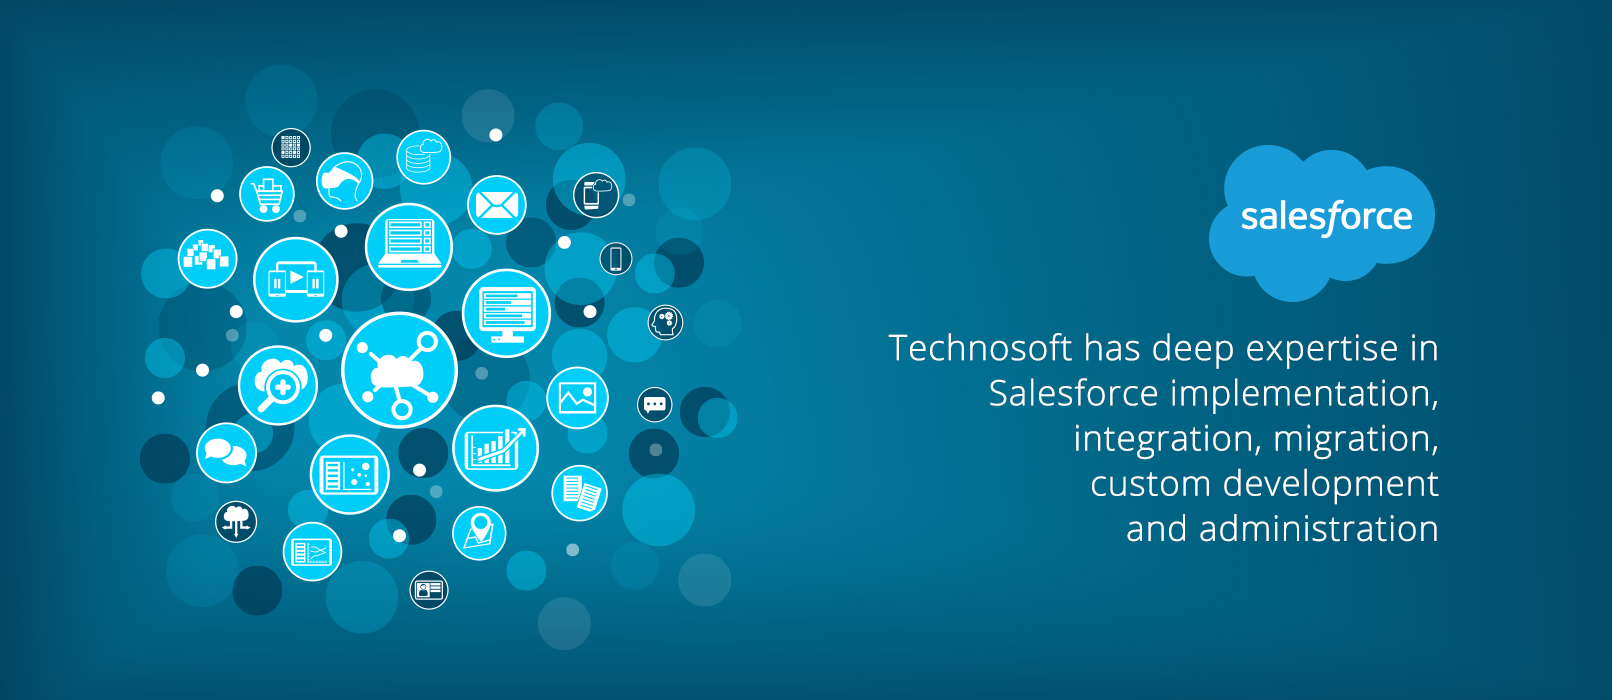 Technosoft has deep expertise in Salesforce implementation, integration, migration, custom development and administration.